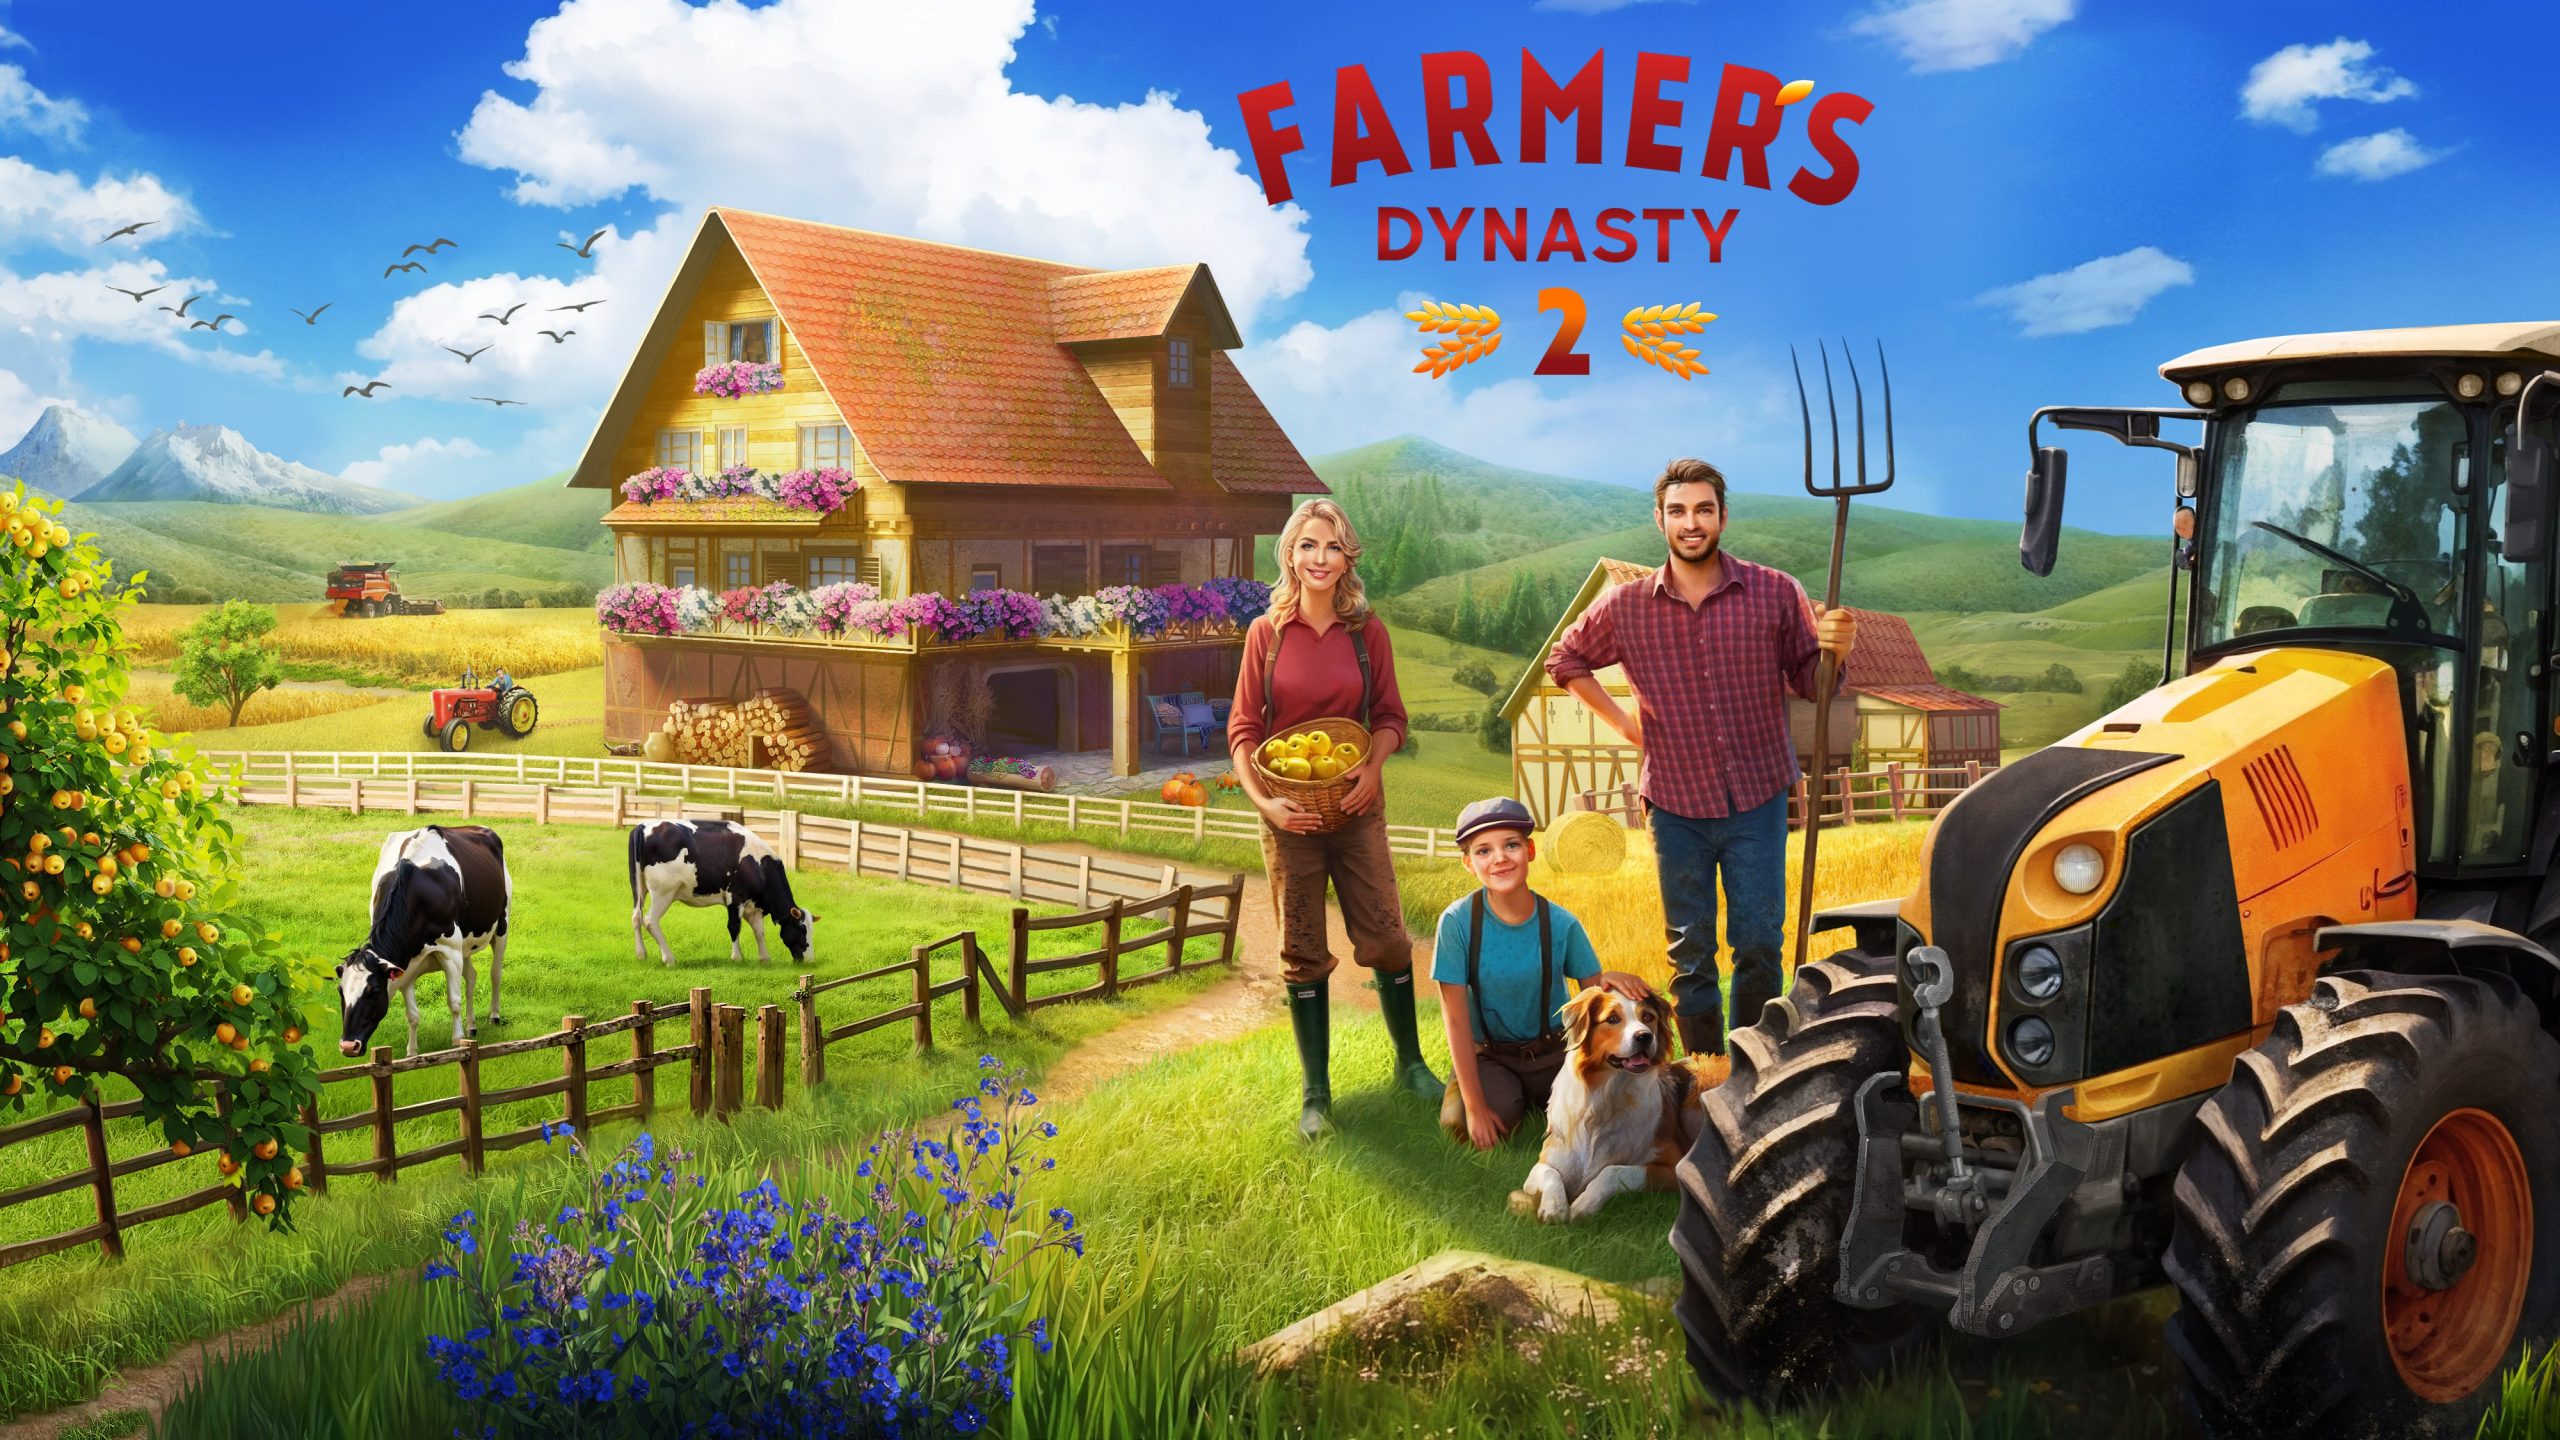 Ranch Simulator Early Access Review - Game on Aus